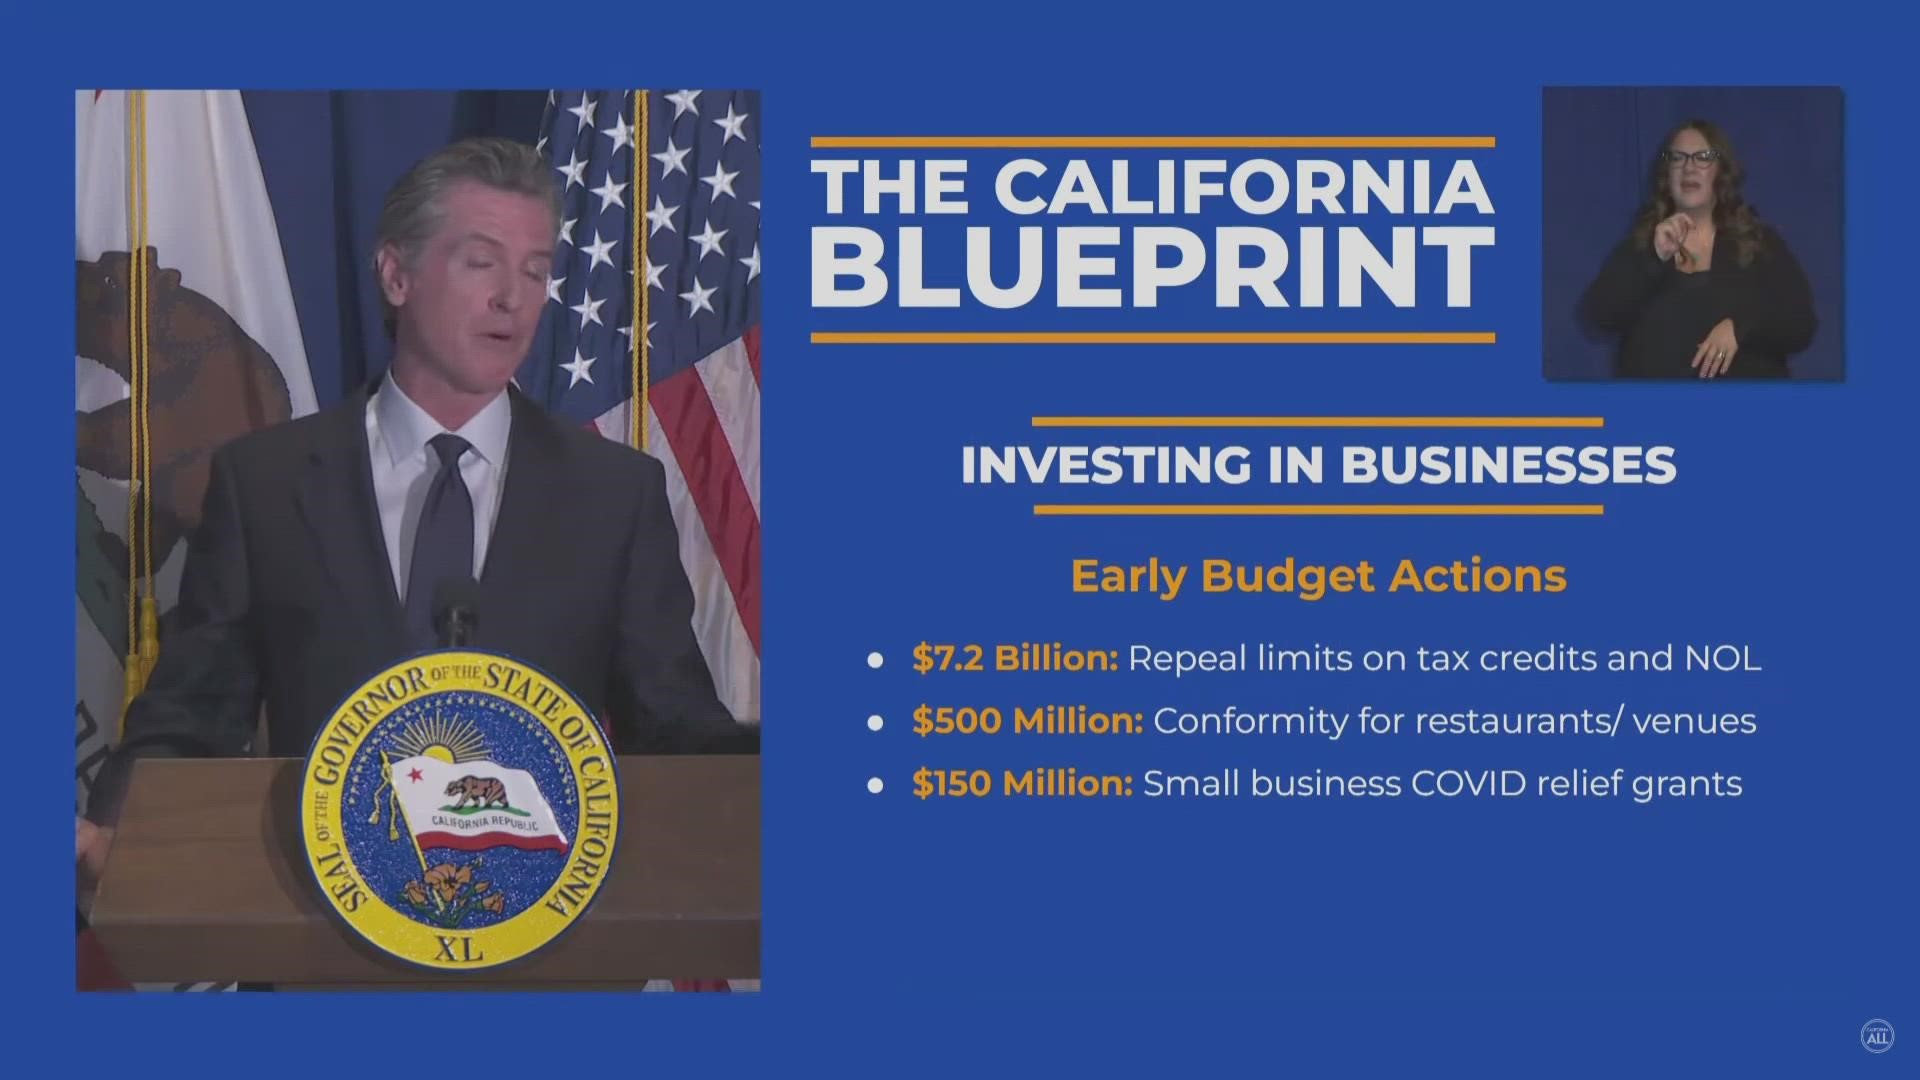 Gov. Gavin Newsom speaks about the revised budget, touching on investing in both big and small businesses and bringing jobs and employment to California.